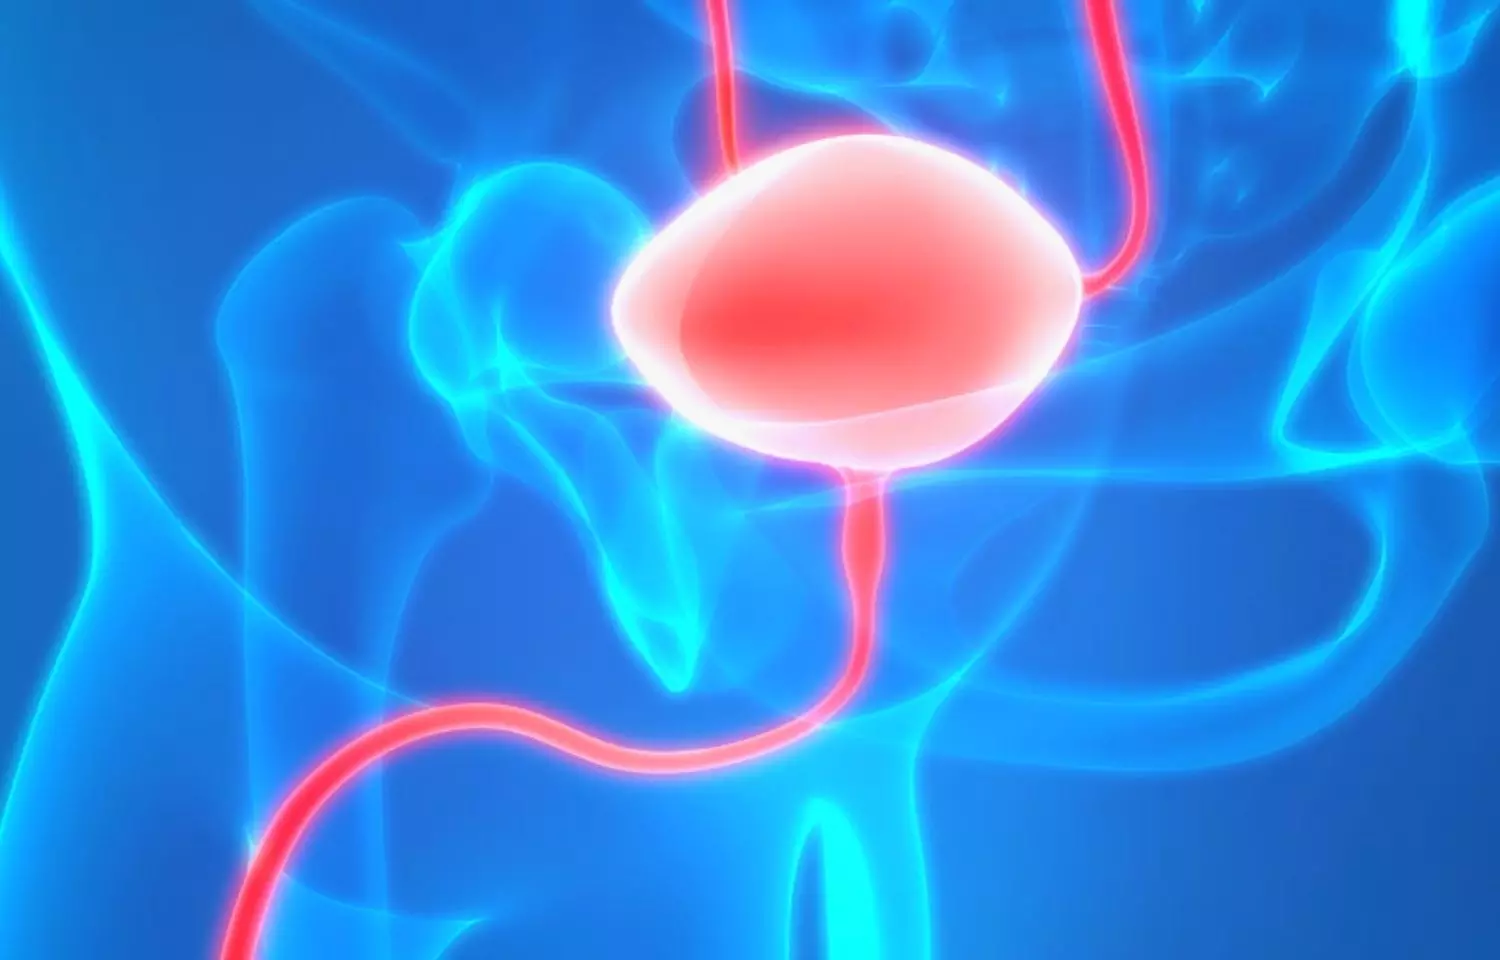 AUA guidelines on diagnosis and treatment of interstitial cystitis/bladder pain syndrome